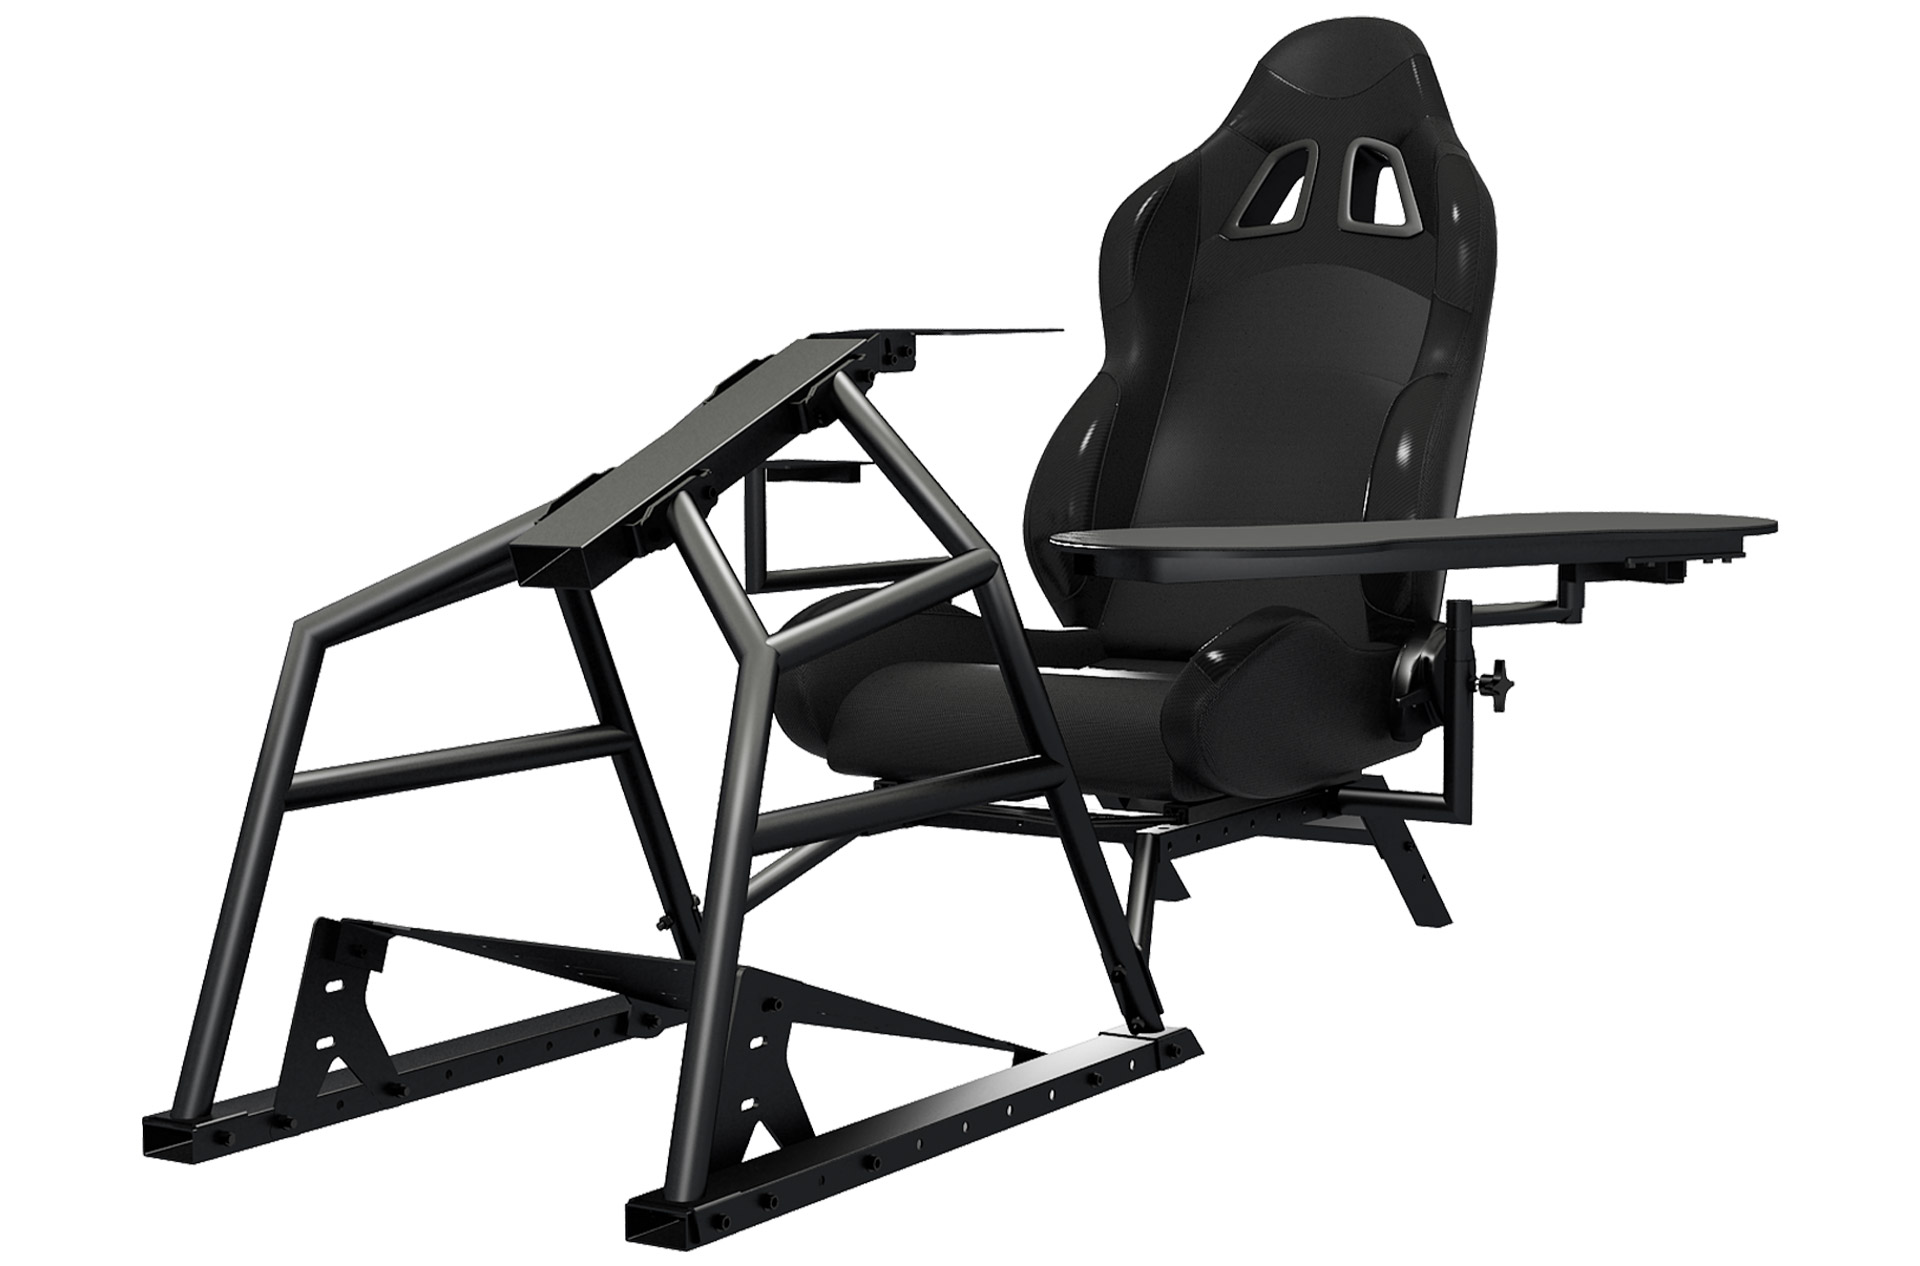 Image of an Obutto R3volution computer gaming chair